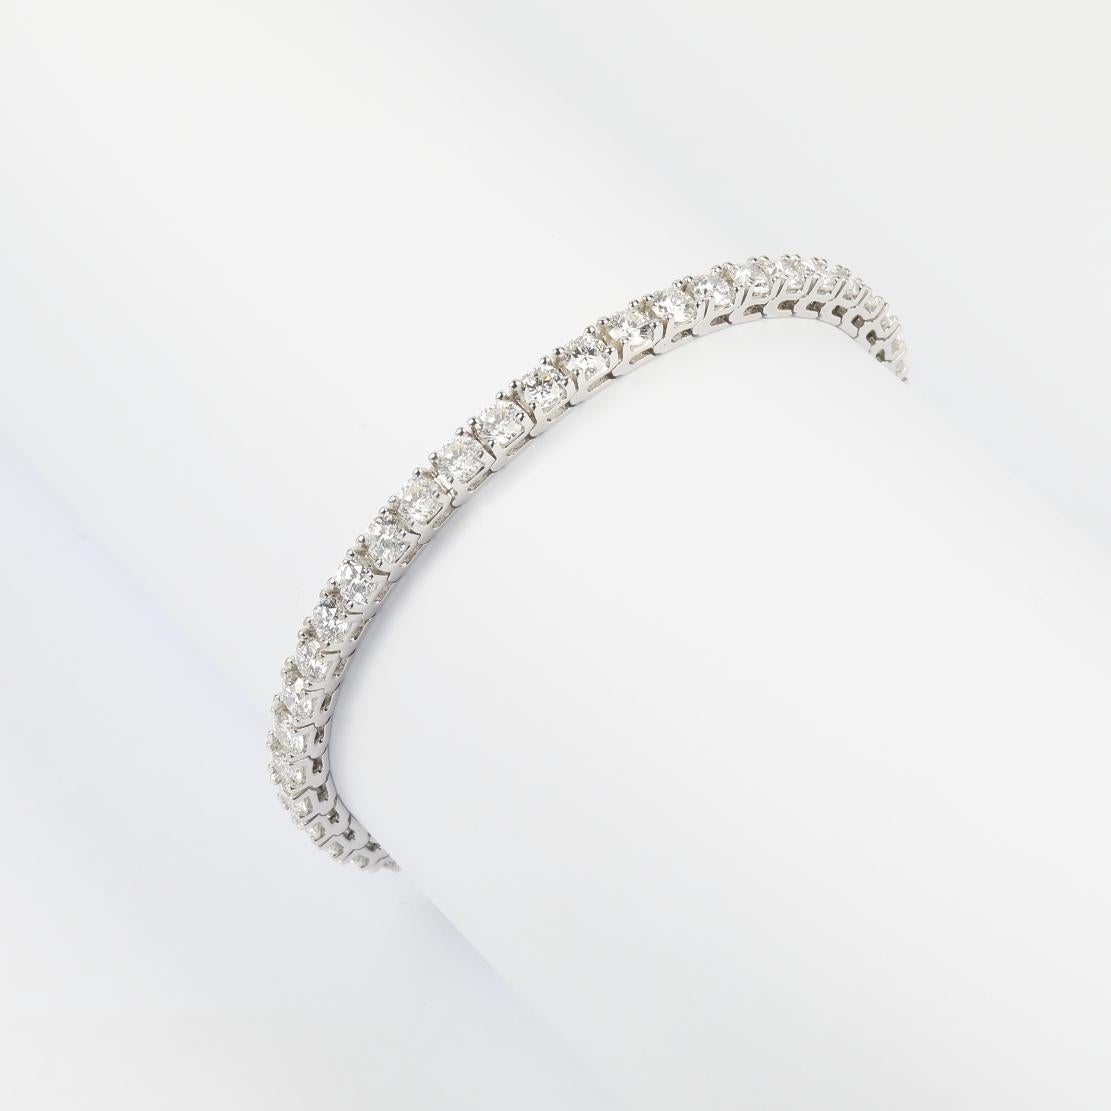  Classic Diamond Tennis Bracelet, featuring:
✧ 44 natural round diamonds F-G color VS+ weighing approx. 9.46 carats
✧ Approximately 14.5 grams of 14K White Gold 
✧ Free appraisal included with your purchase
✧ Comes with beautiful packaging and